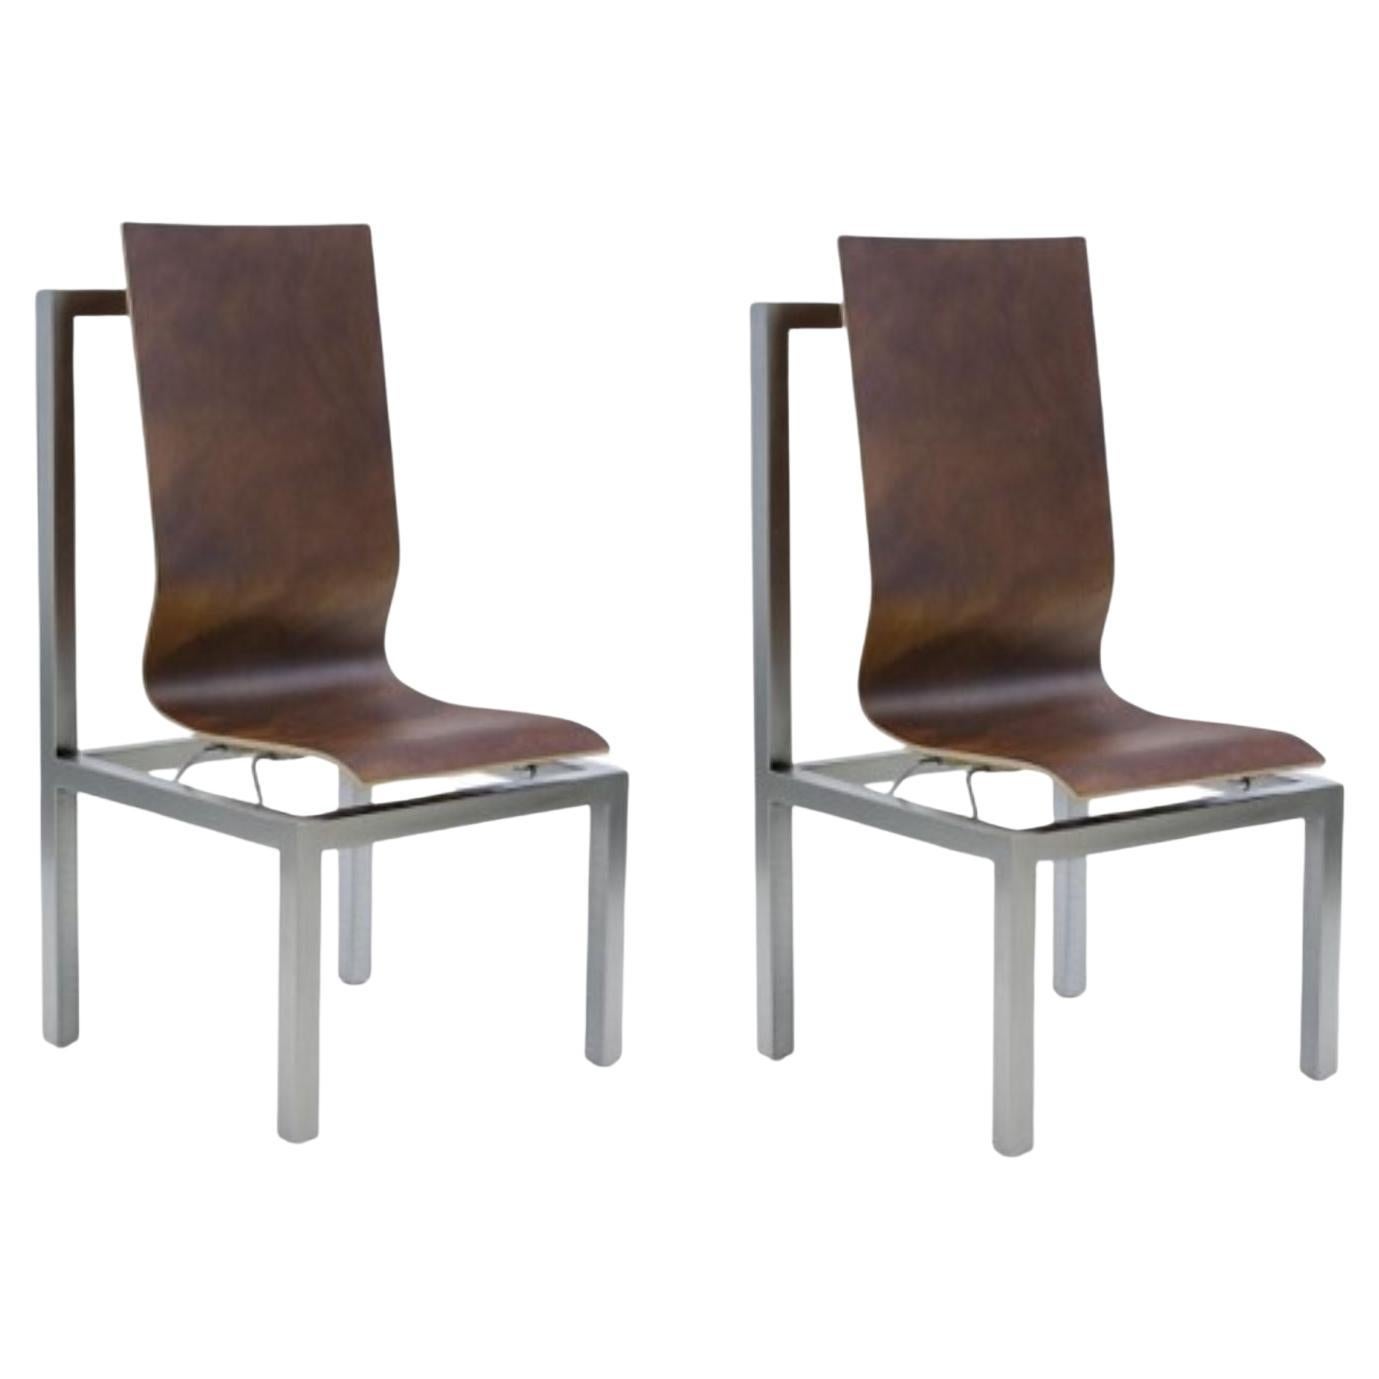 Set of 2 BNF Chaise Chairs by Dominique Perrault & Gaelle Lauriot Prevost